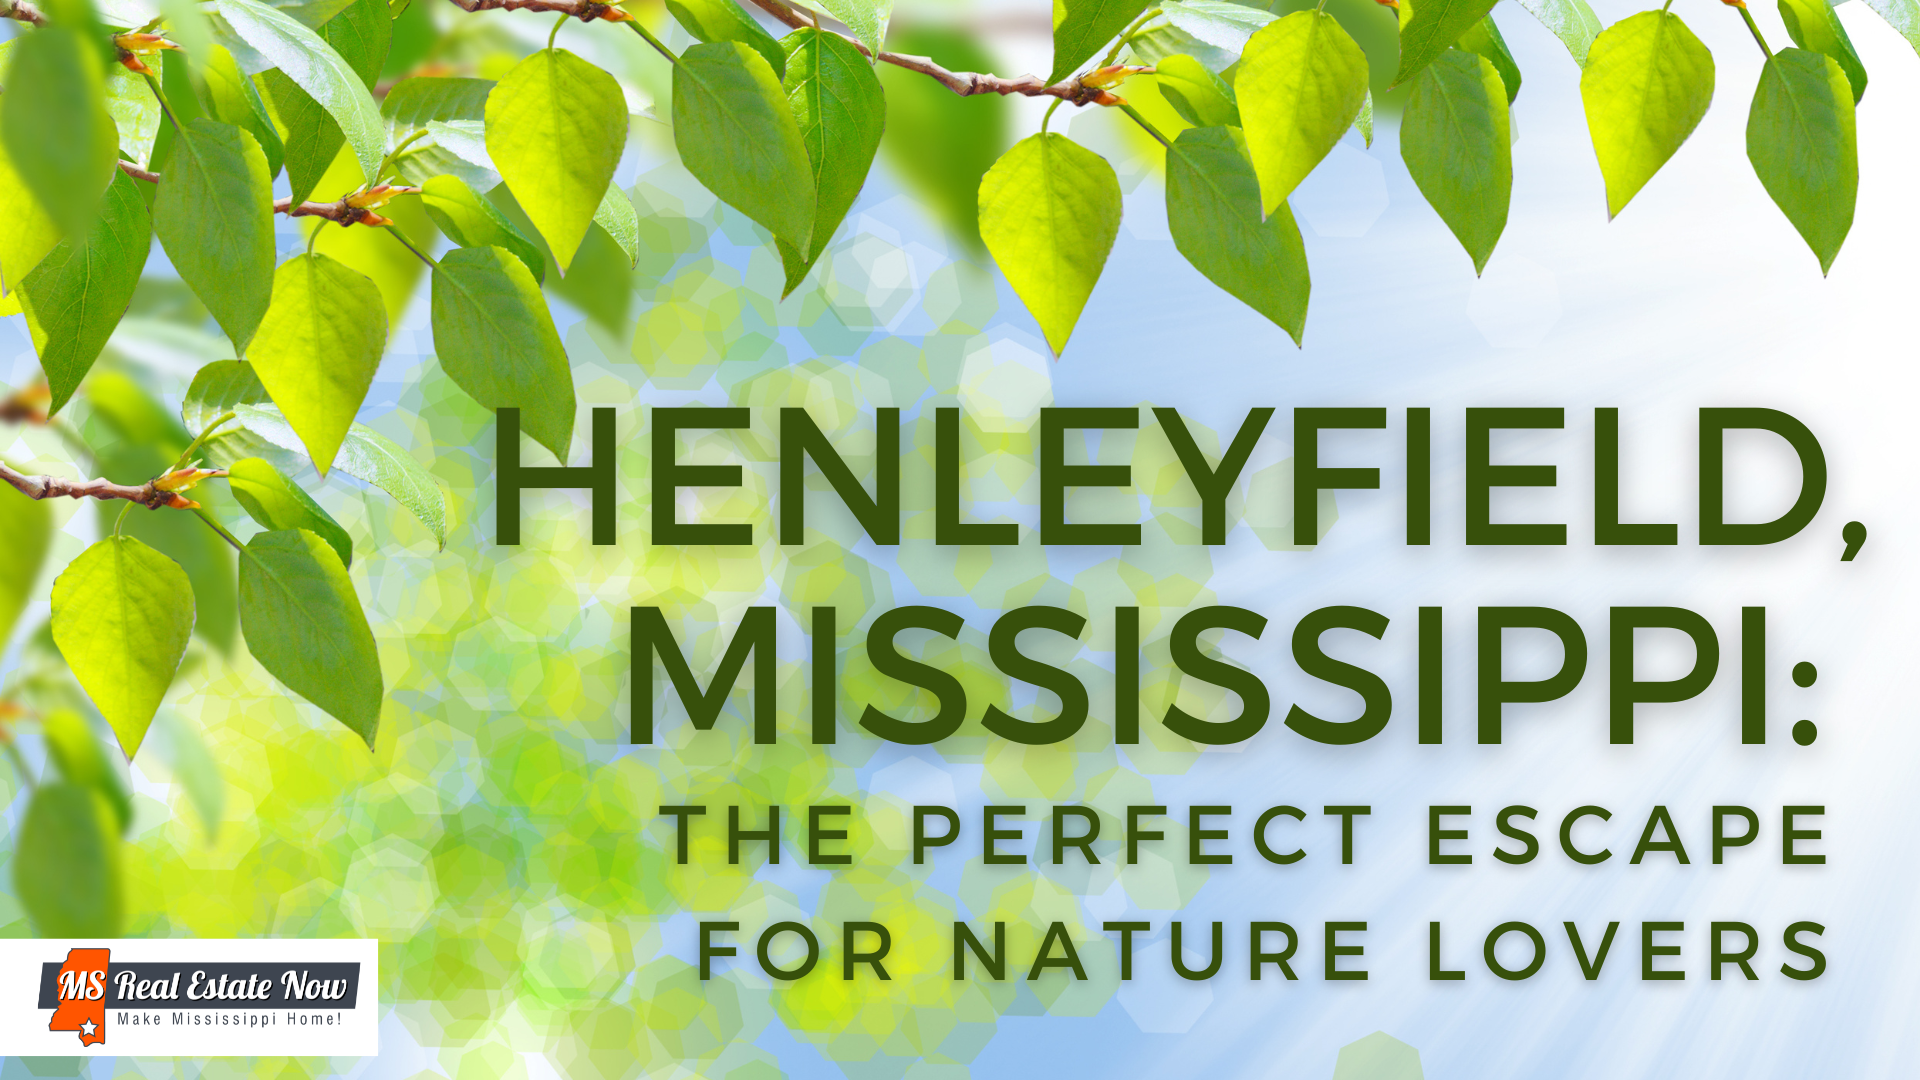 Henleyfield, Mississippi: The Perfect Escape for Nature Lovers